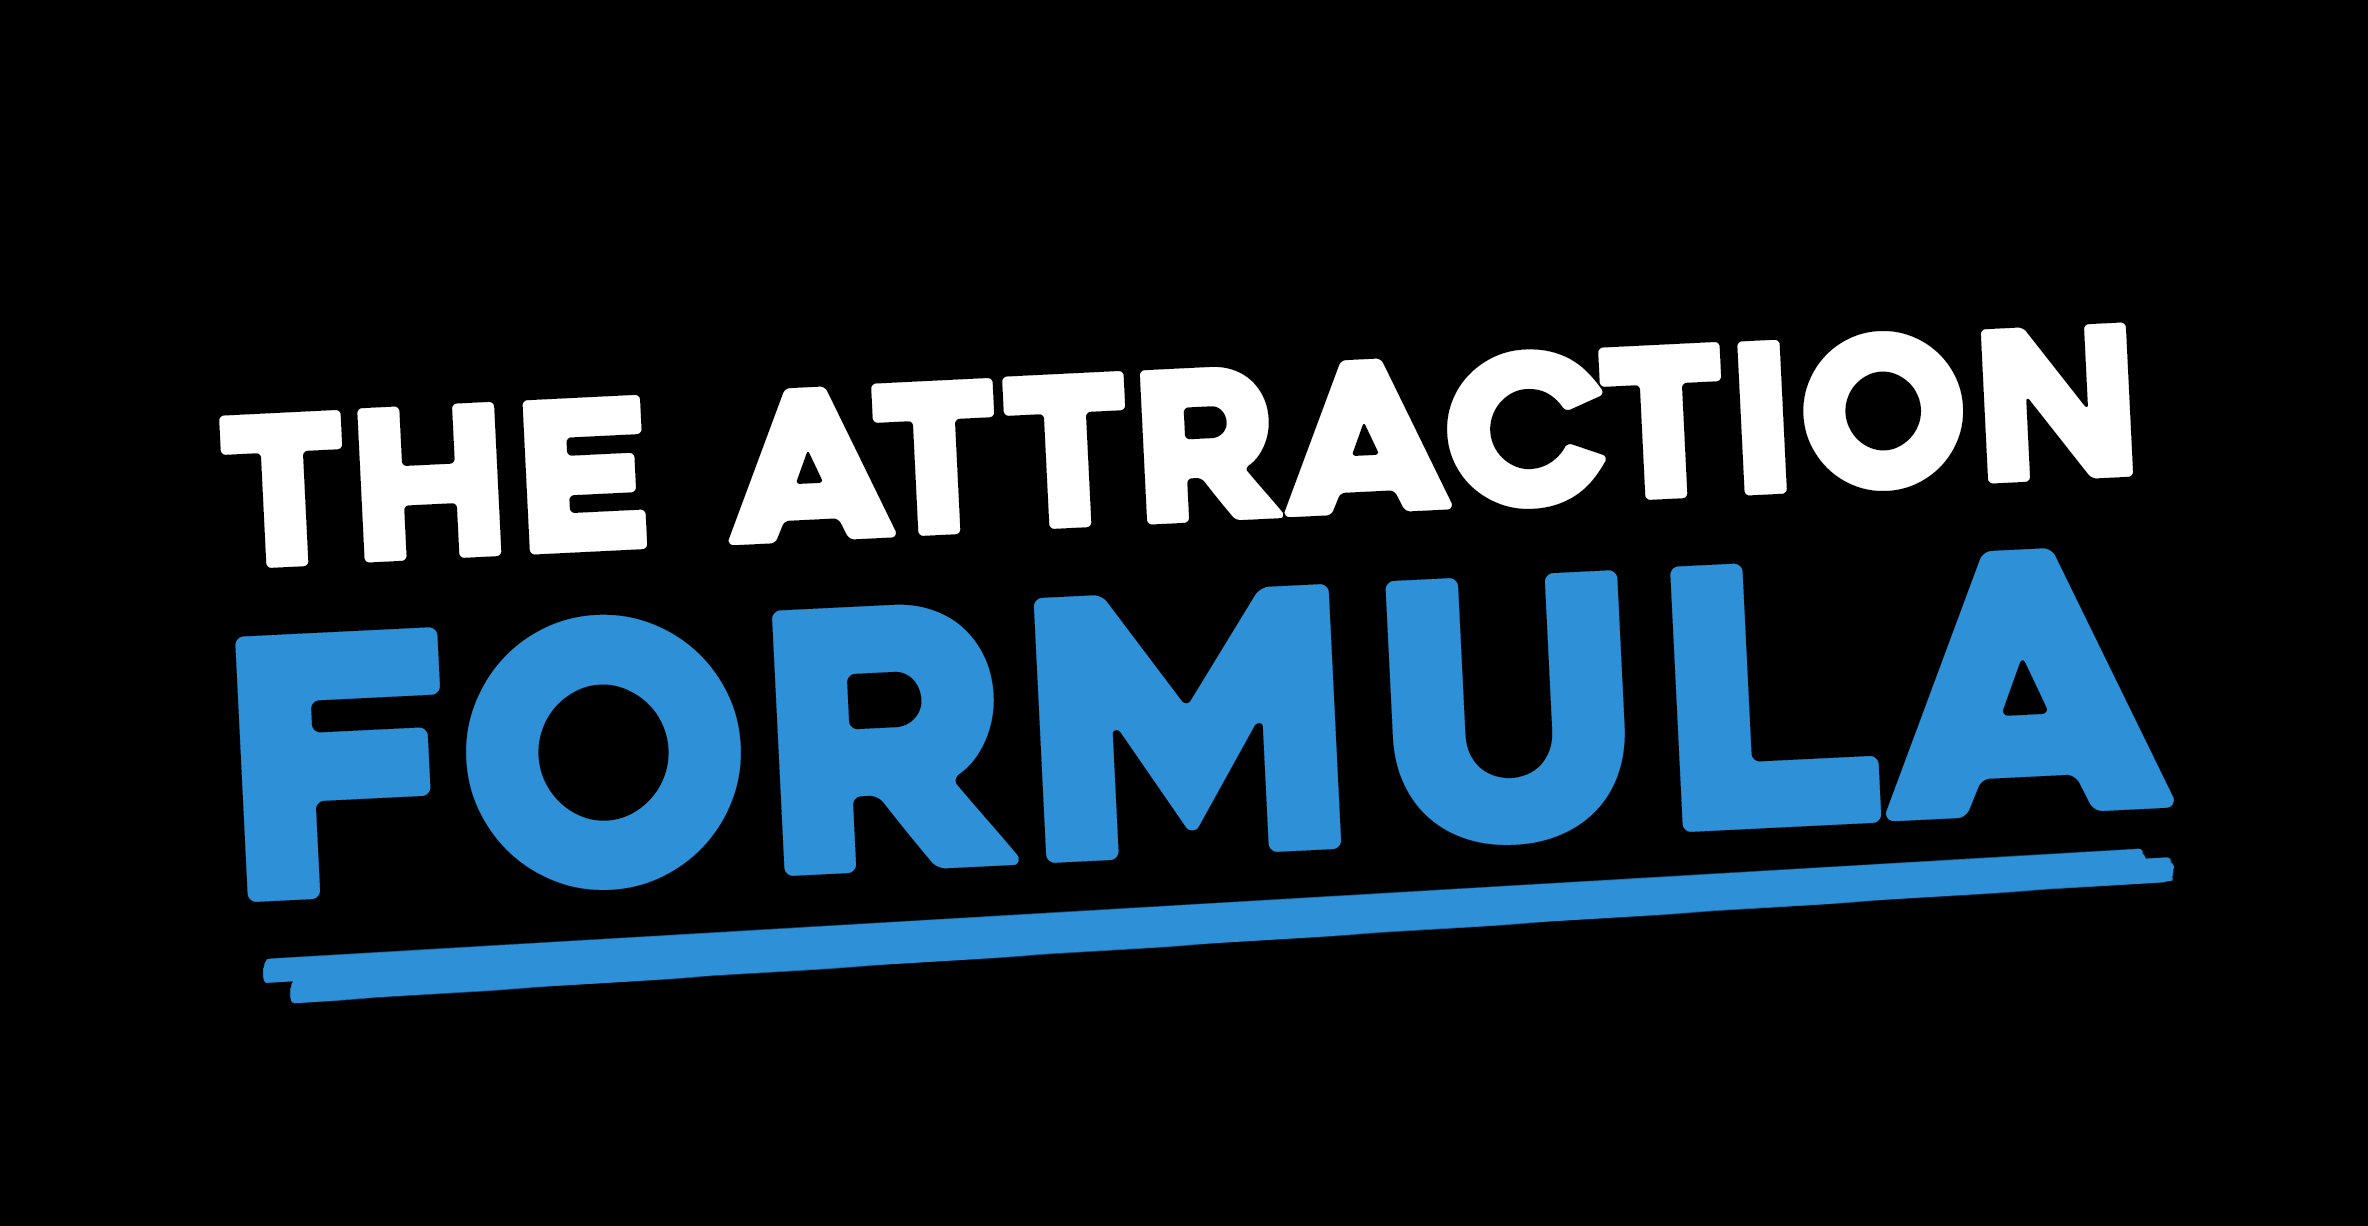 The Attraction Formula